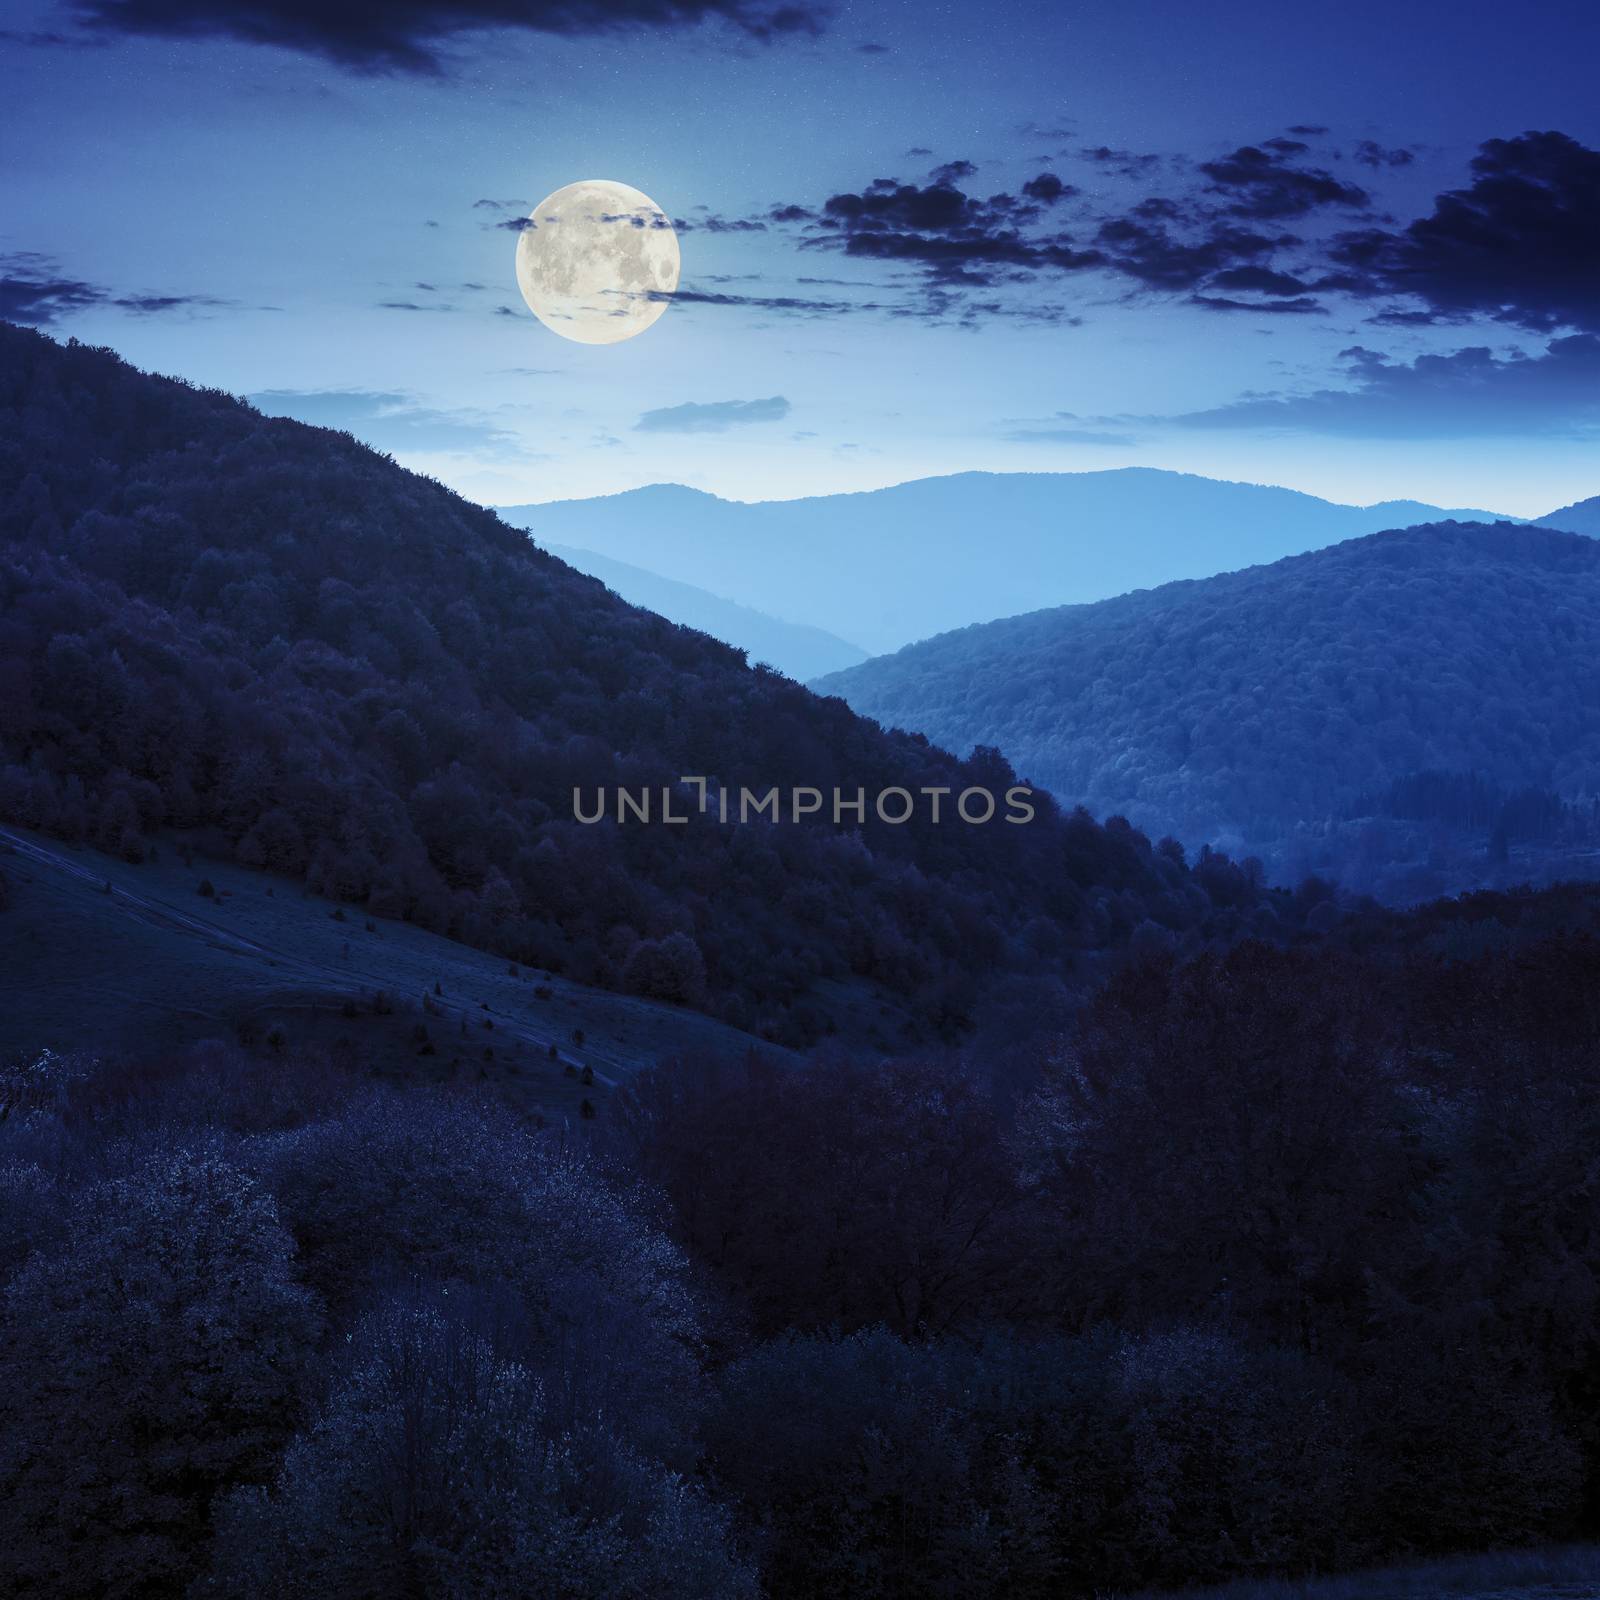 slope of mountain range with autumn forest and foliage at night in full moon light